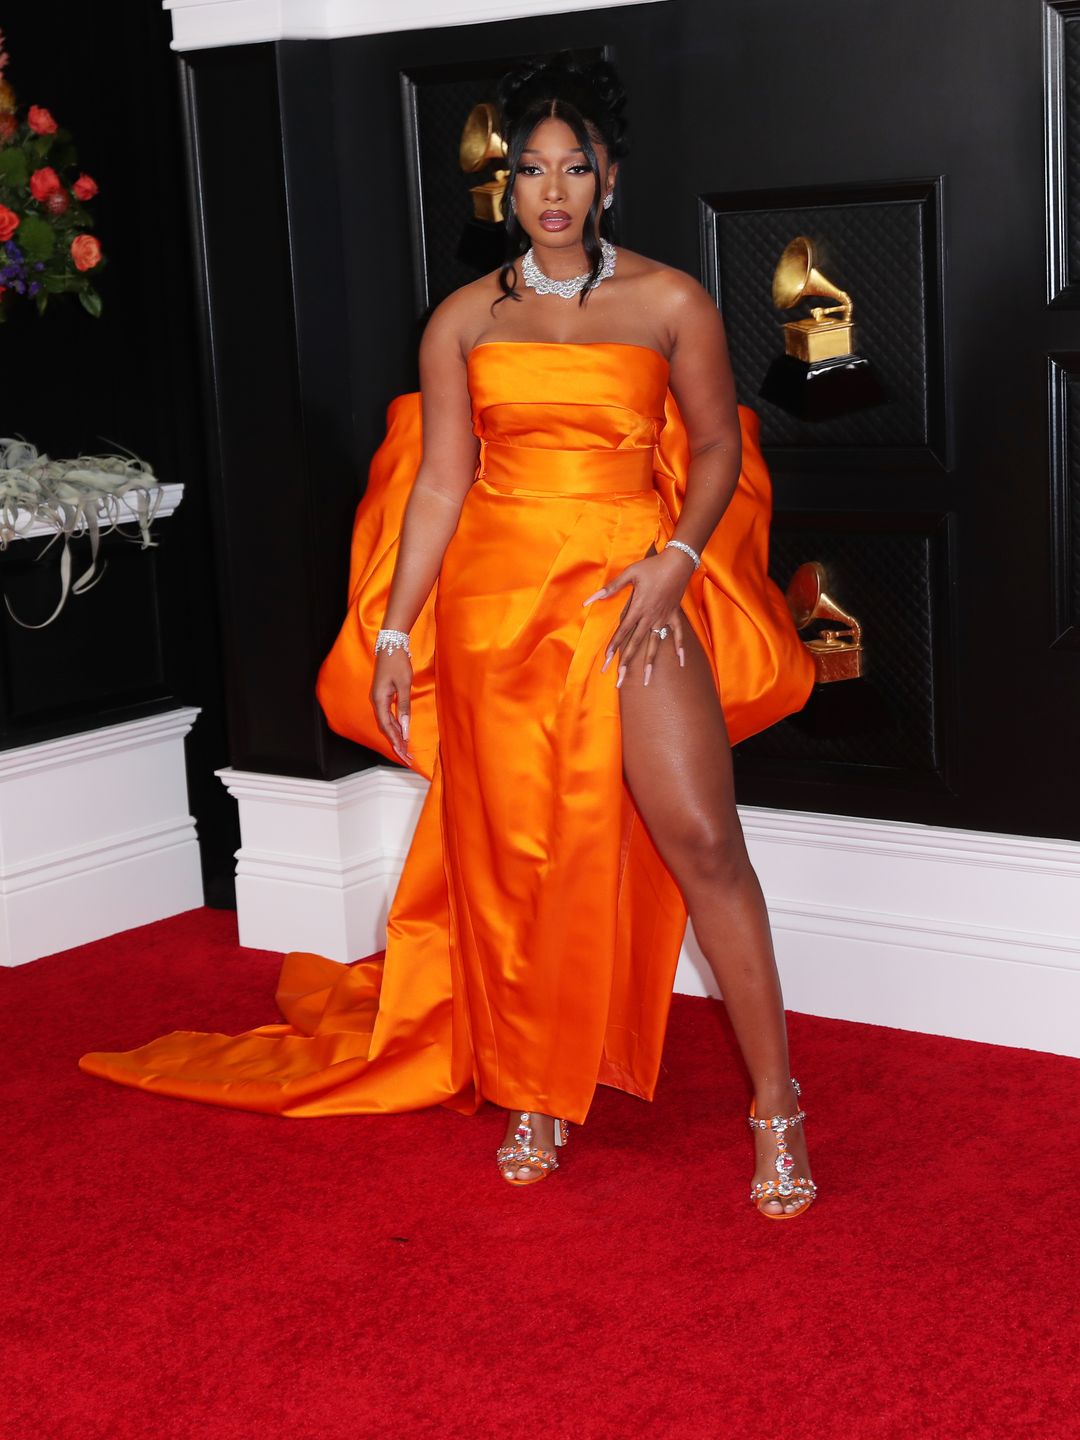 Megan Thee Stallion wears a bright orange gown and diamond jewellery at the Grammy Awards 2021